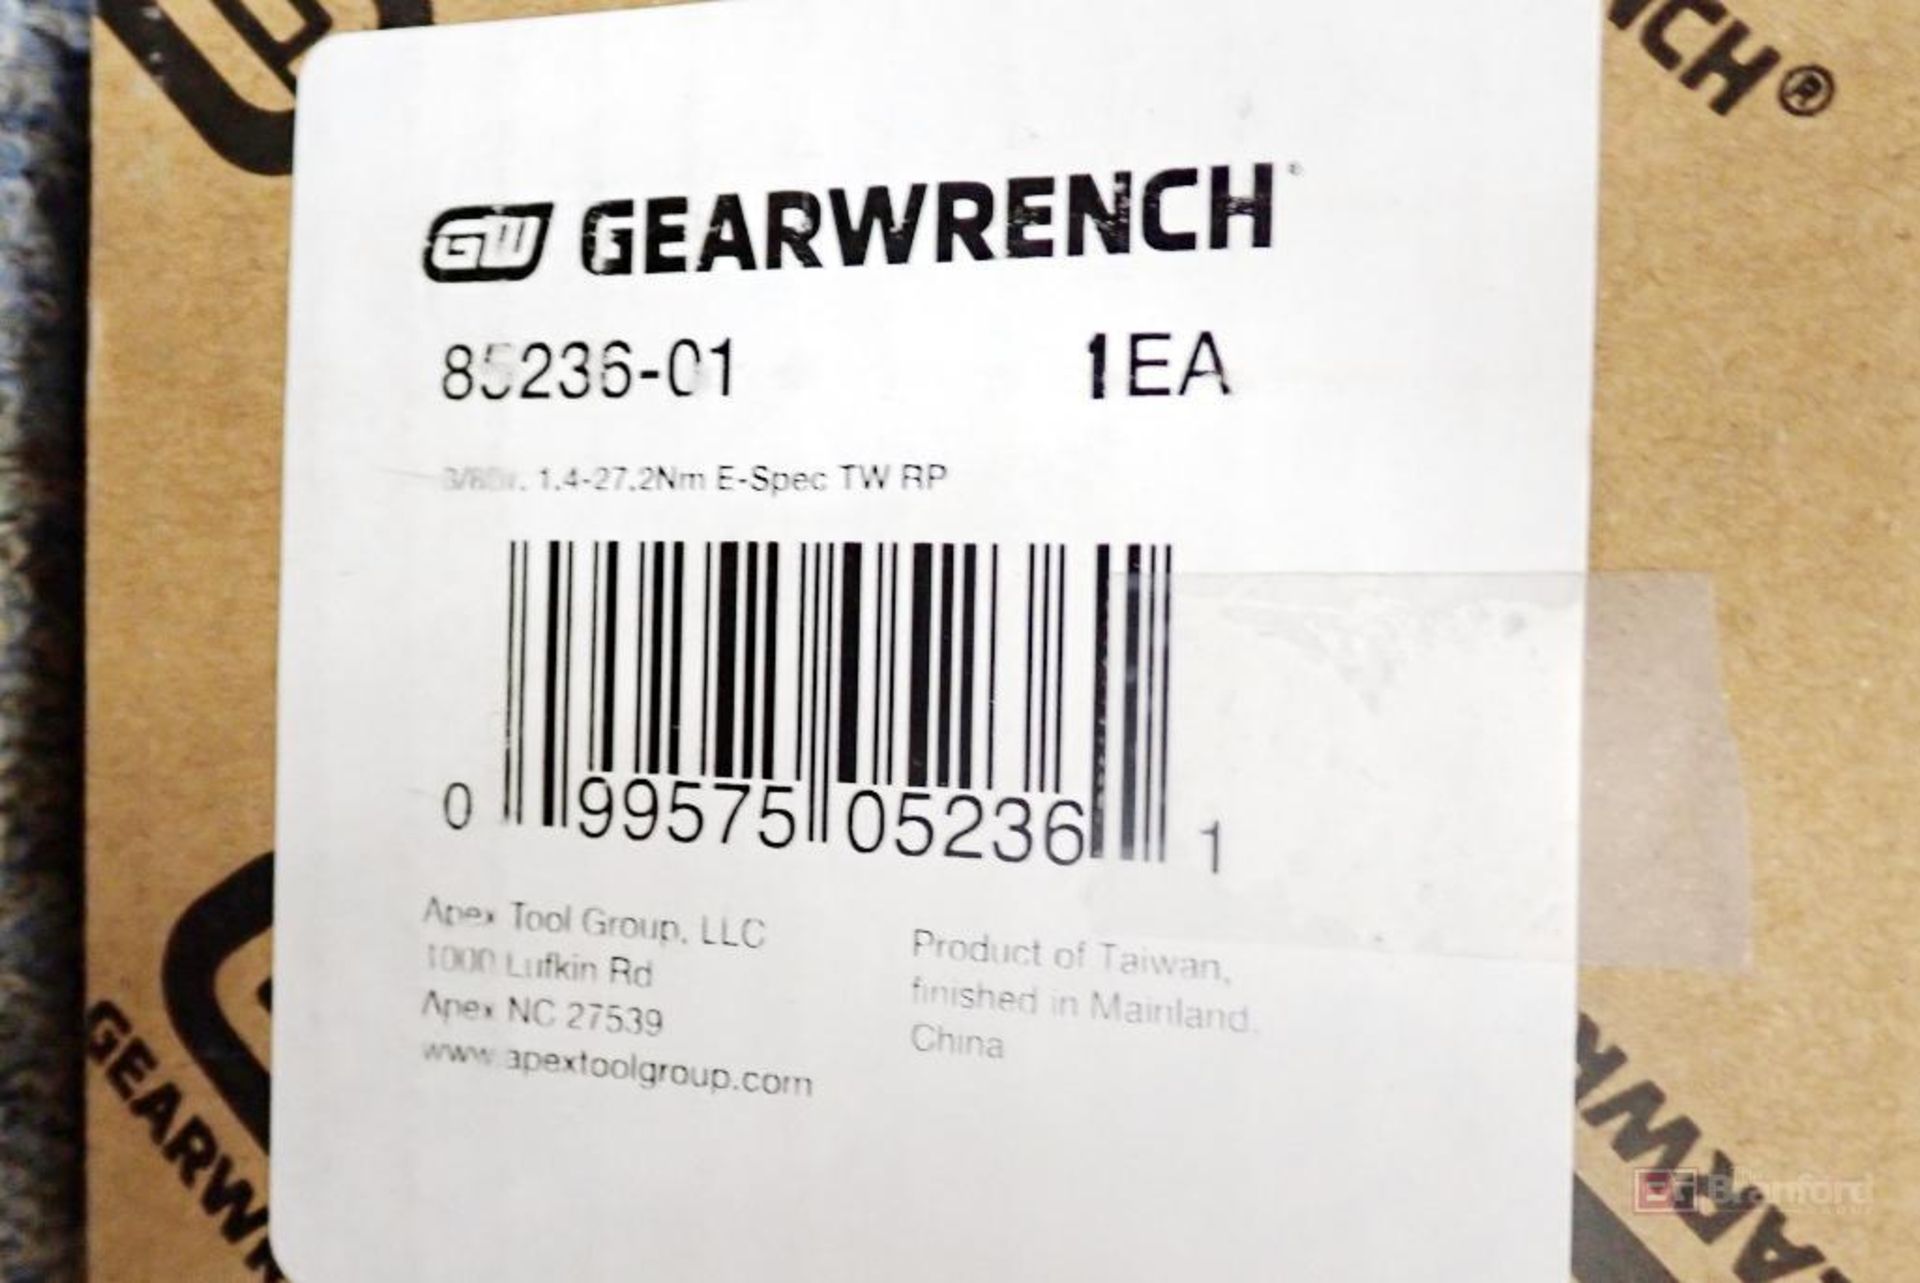 GearWrench 85237-01 E-Spec 3/8" Drive Torque Wrench - Image 3 of 3